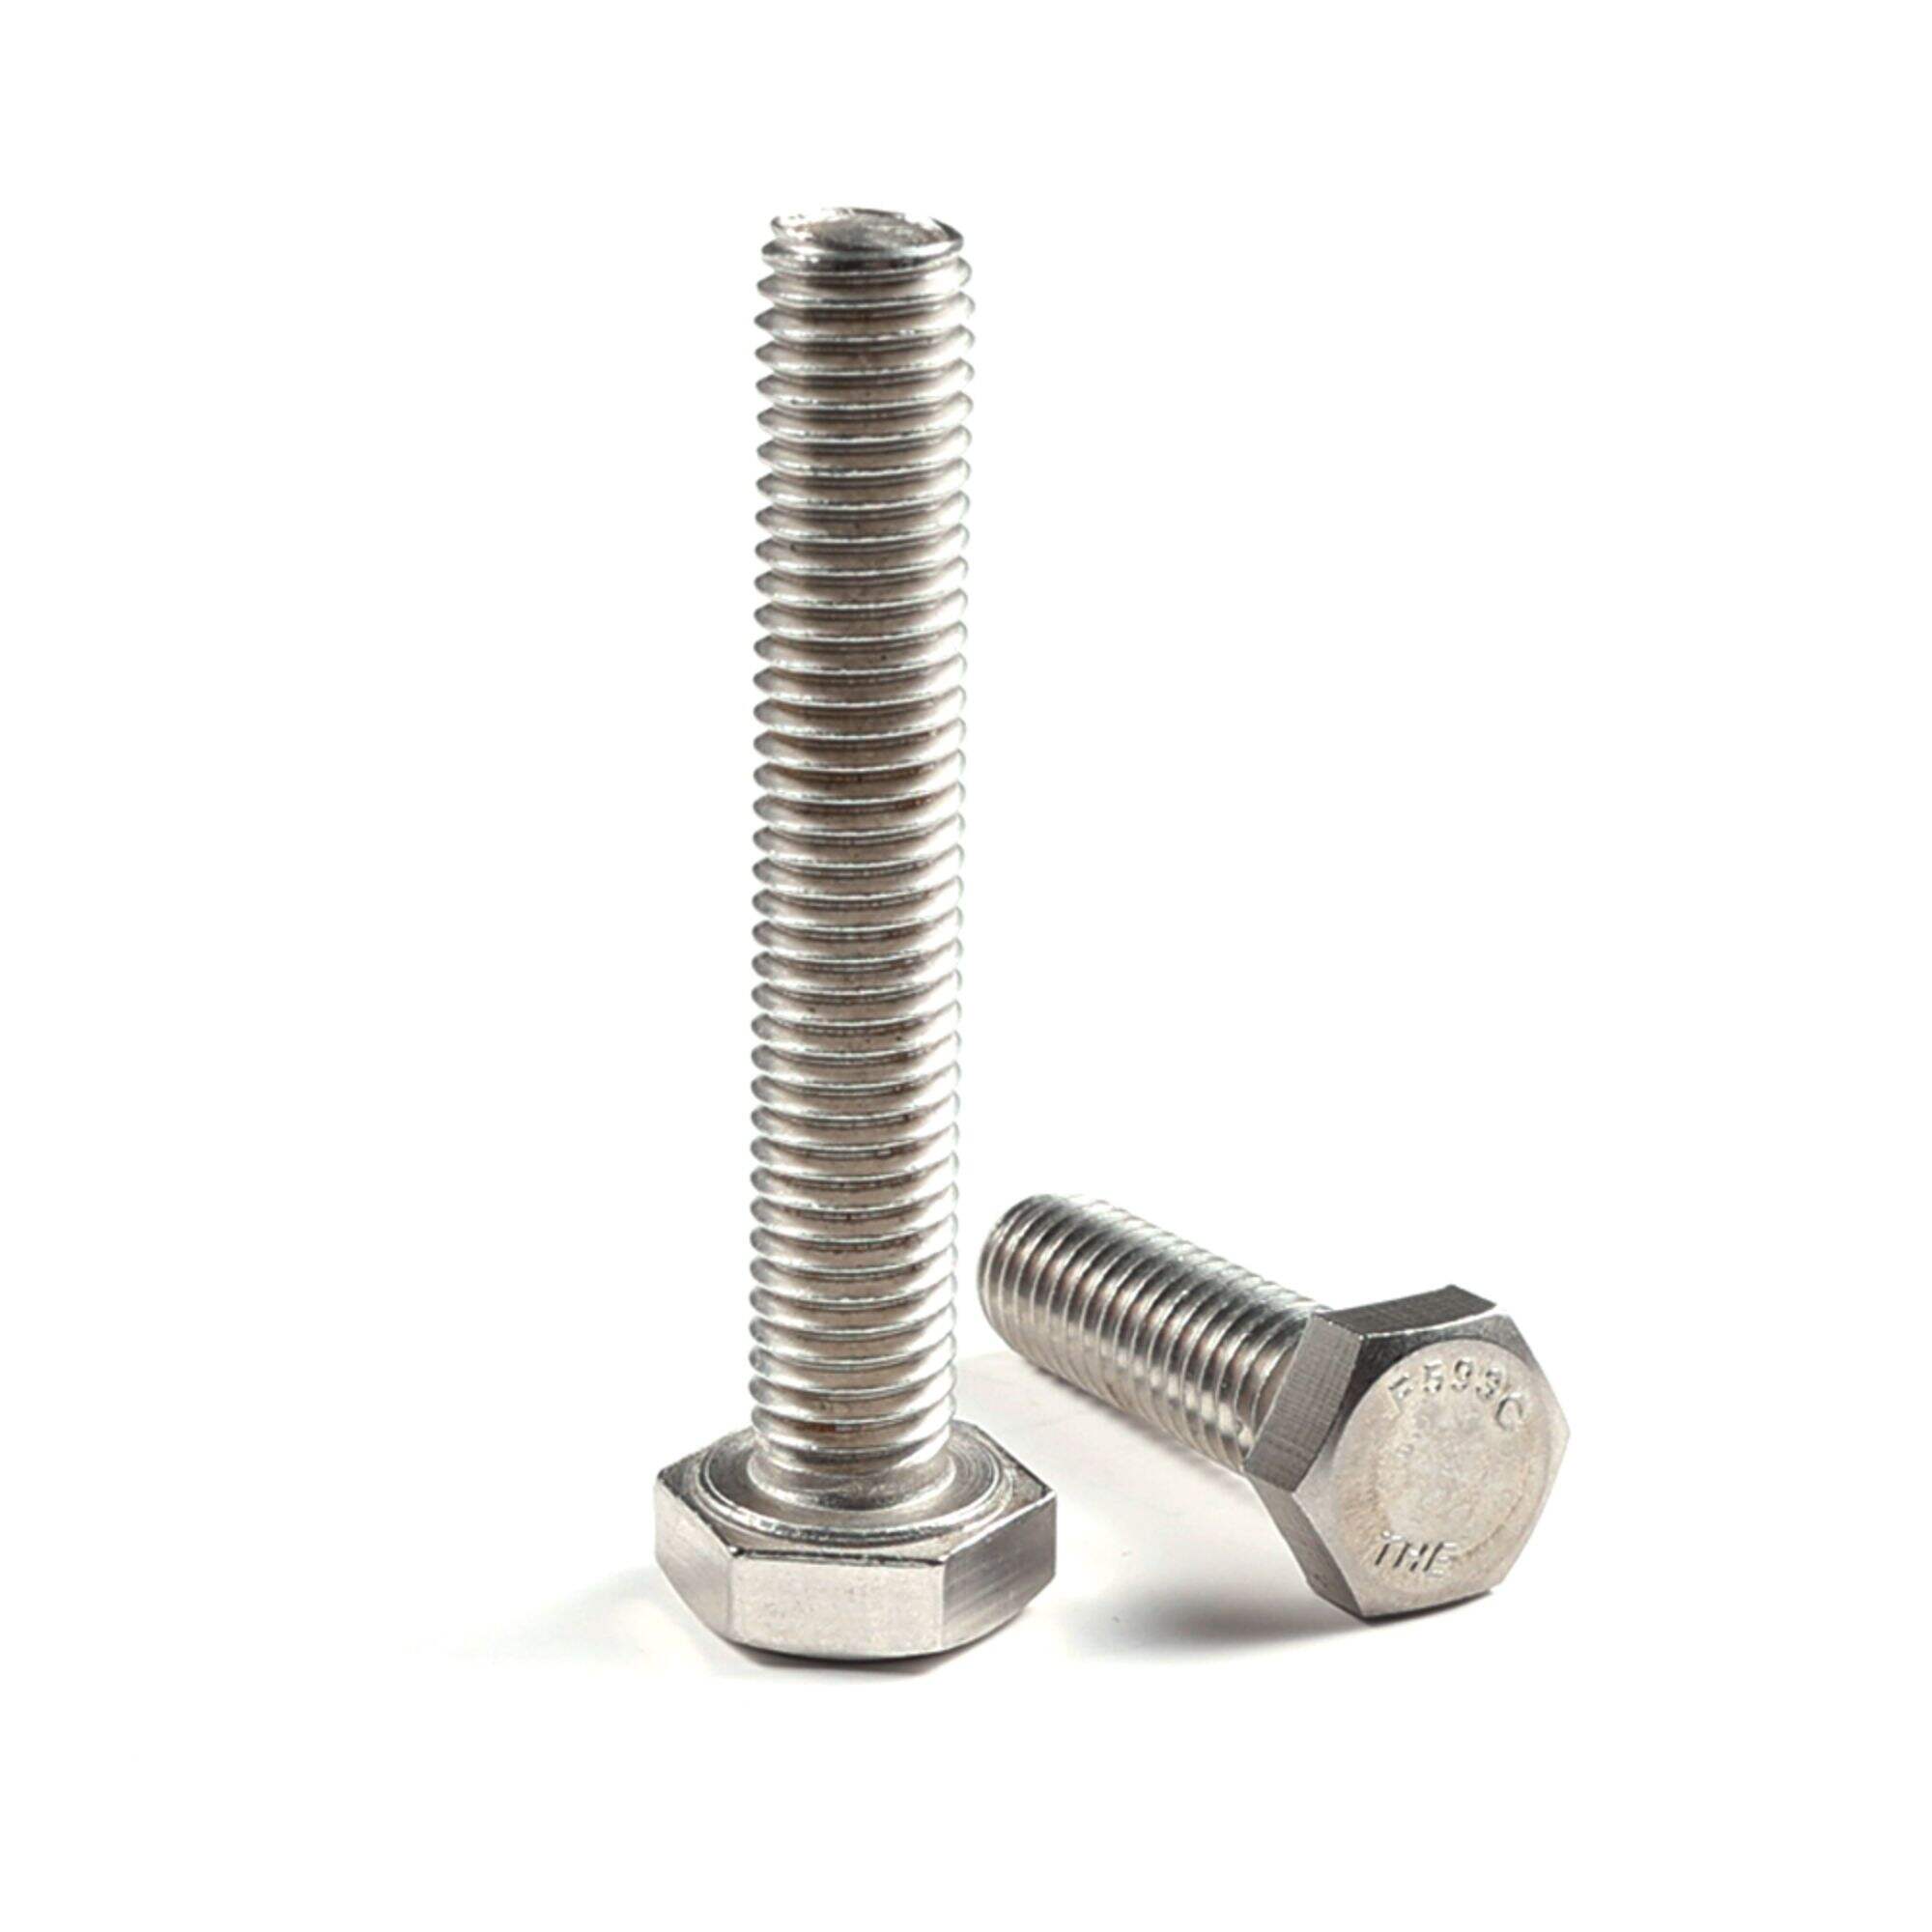 17MM A2 A4  M12 Stainless Steel  F593c  Flat Head Hex Bolt